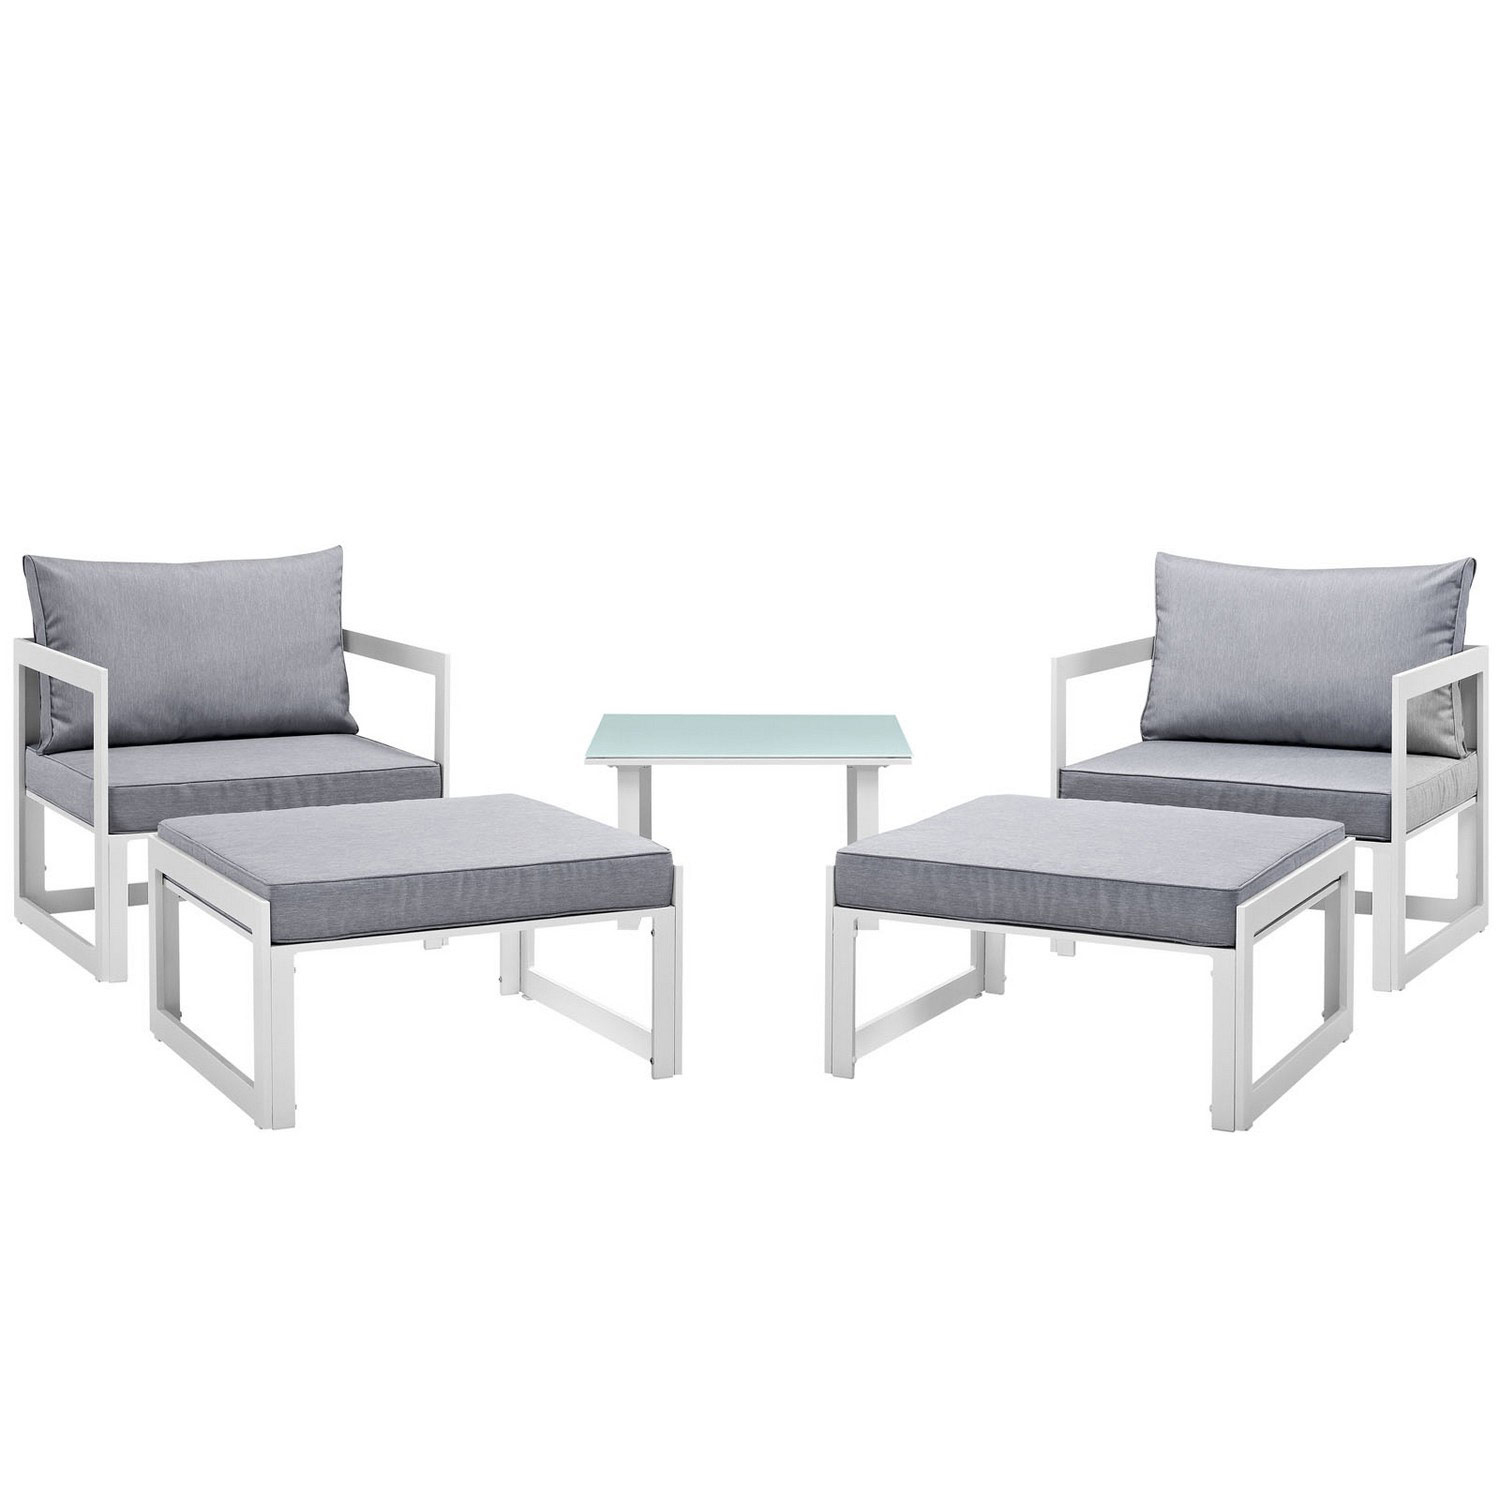 Modway Fortuna 5 Piece Outdoor Patio Sectional Sofa Set - White/Gray